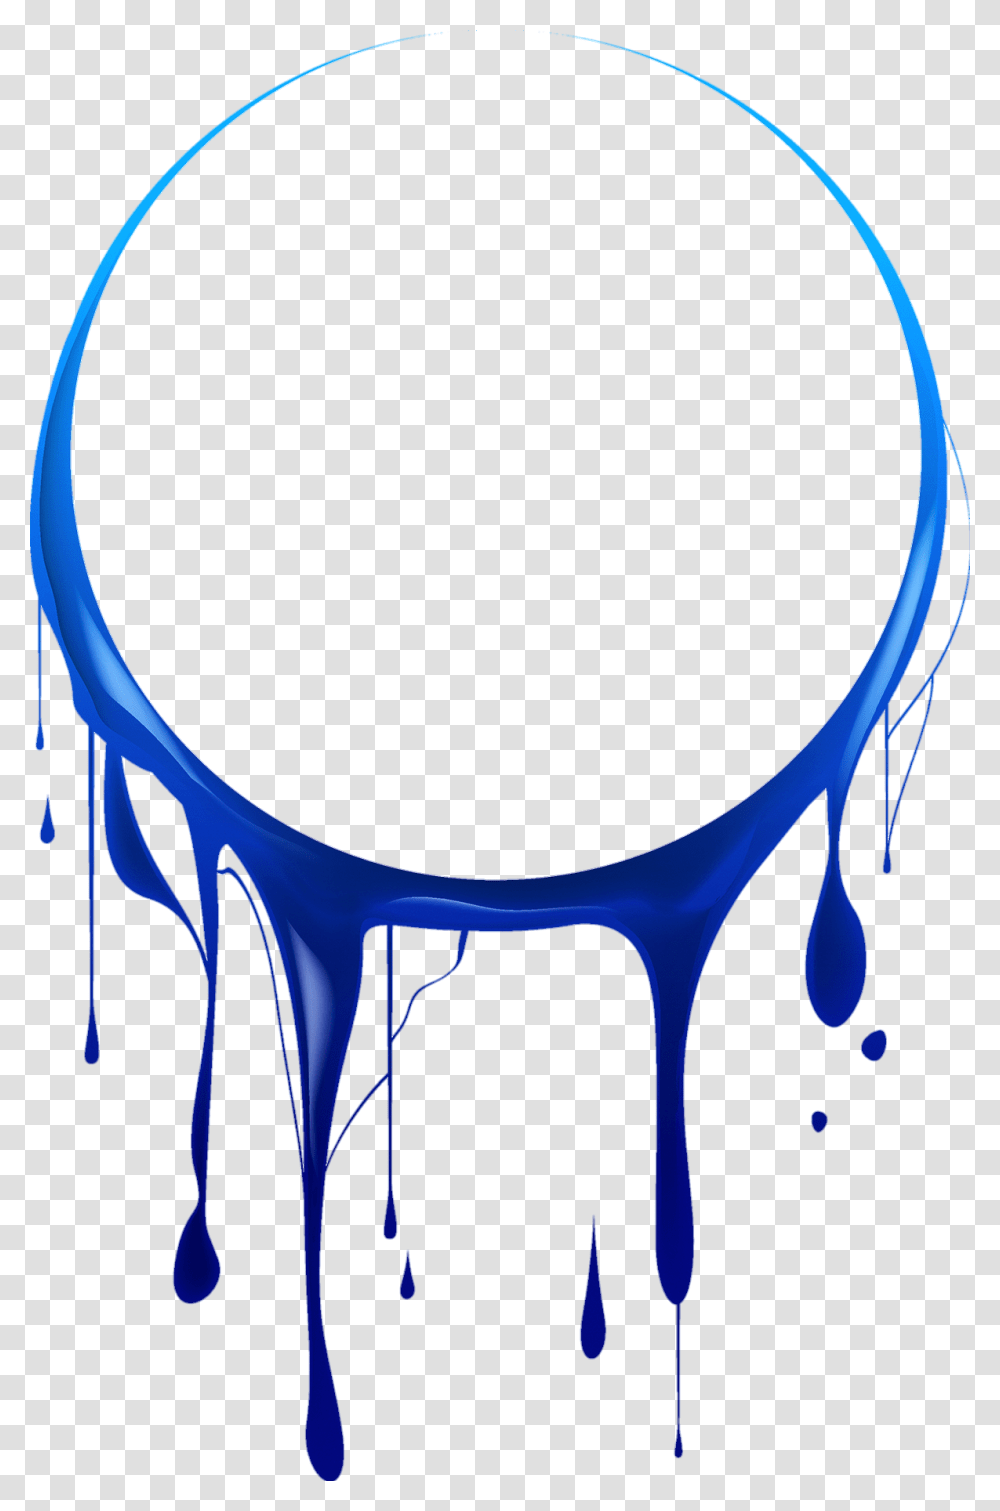 Painting Transprent Free Download Blue Paint Drip, Glass, Accessories, Sunglasses, Alcohol Transparent Png